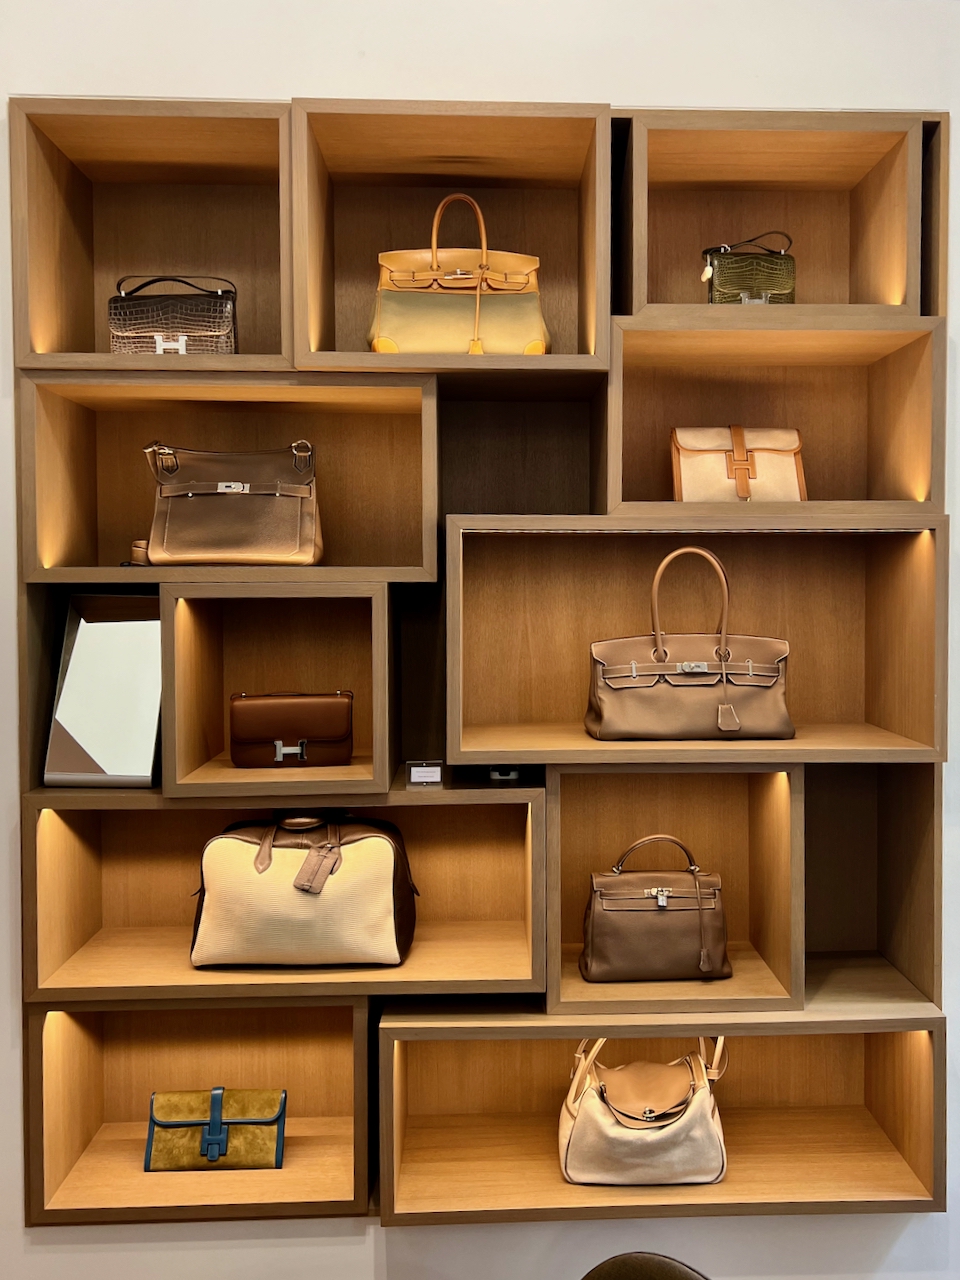 The Hermès Display at Collector Square. Photo via @The_Notorious_Pink